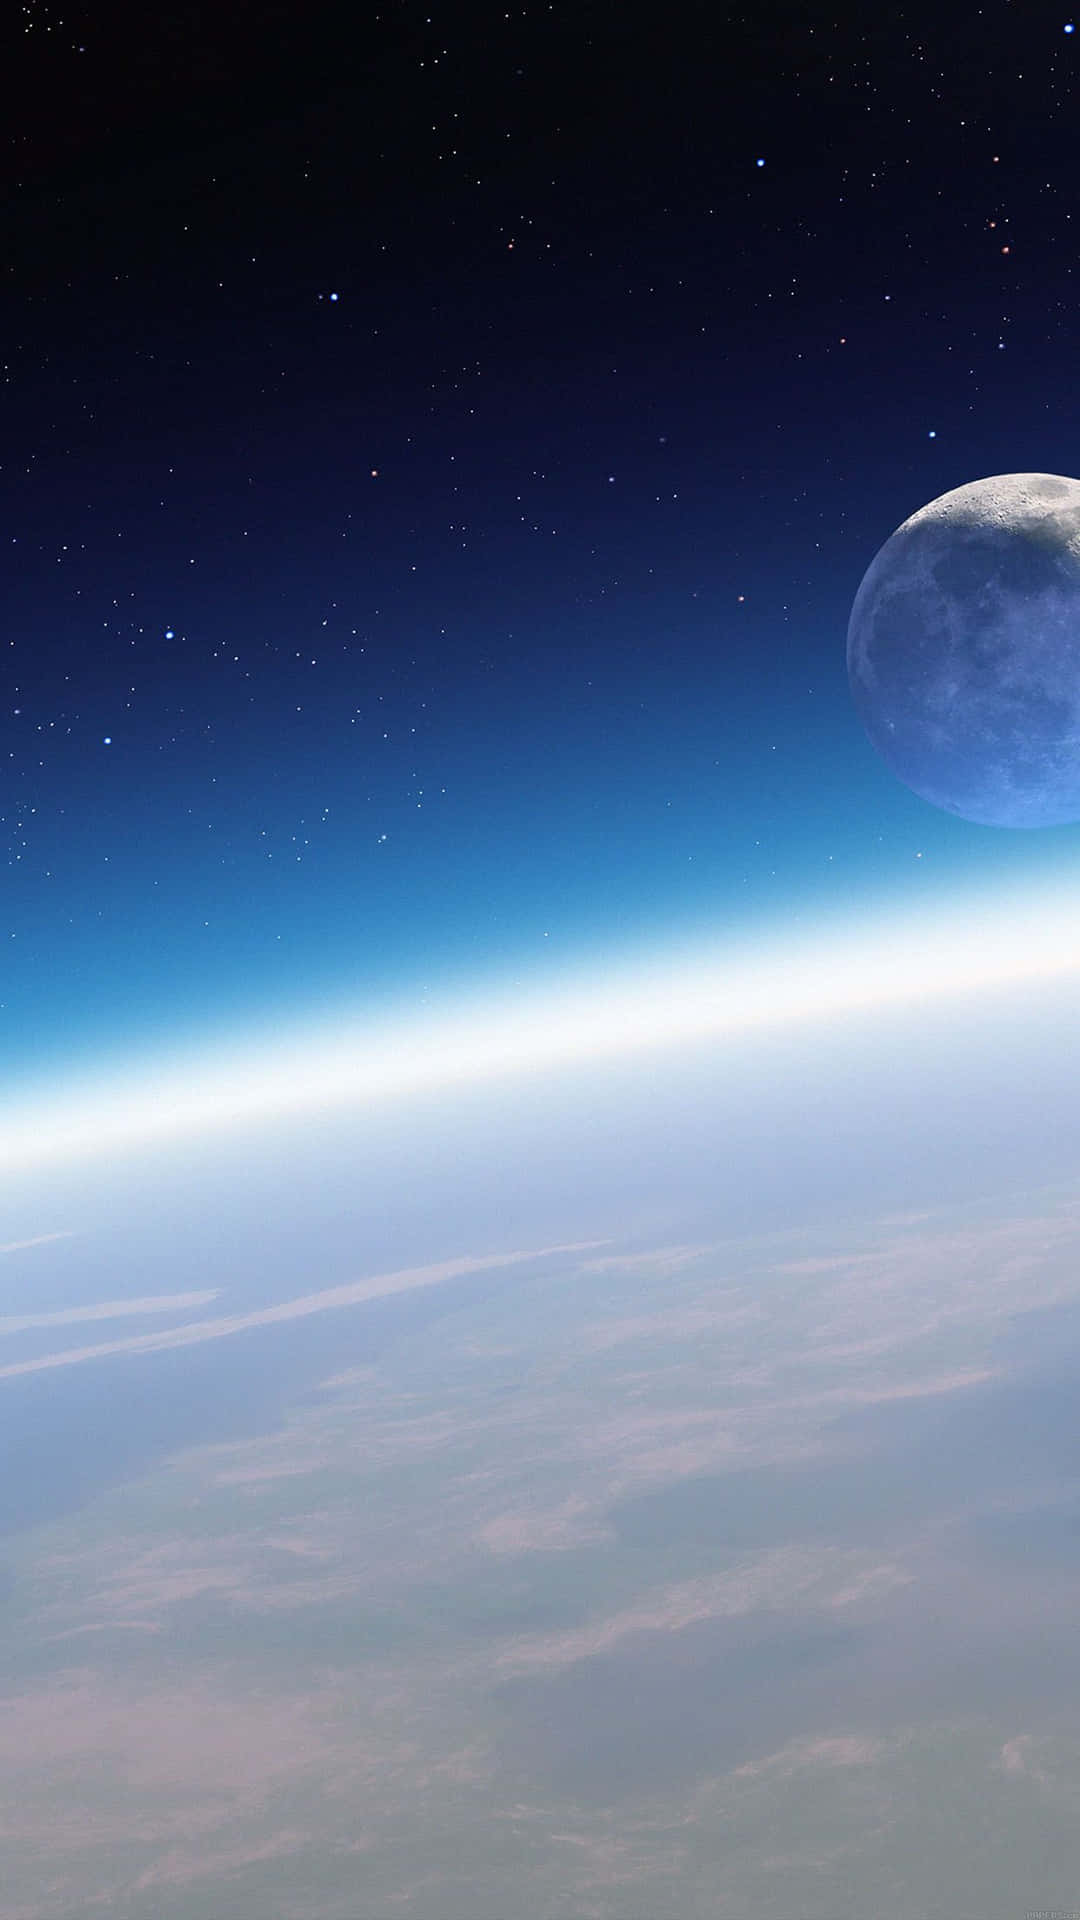 A Moon Is Seen From The Earth